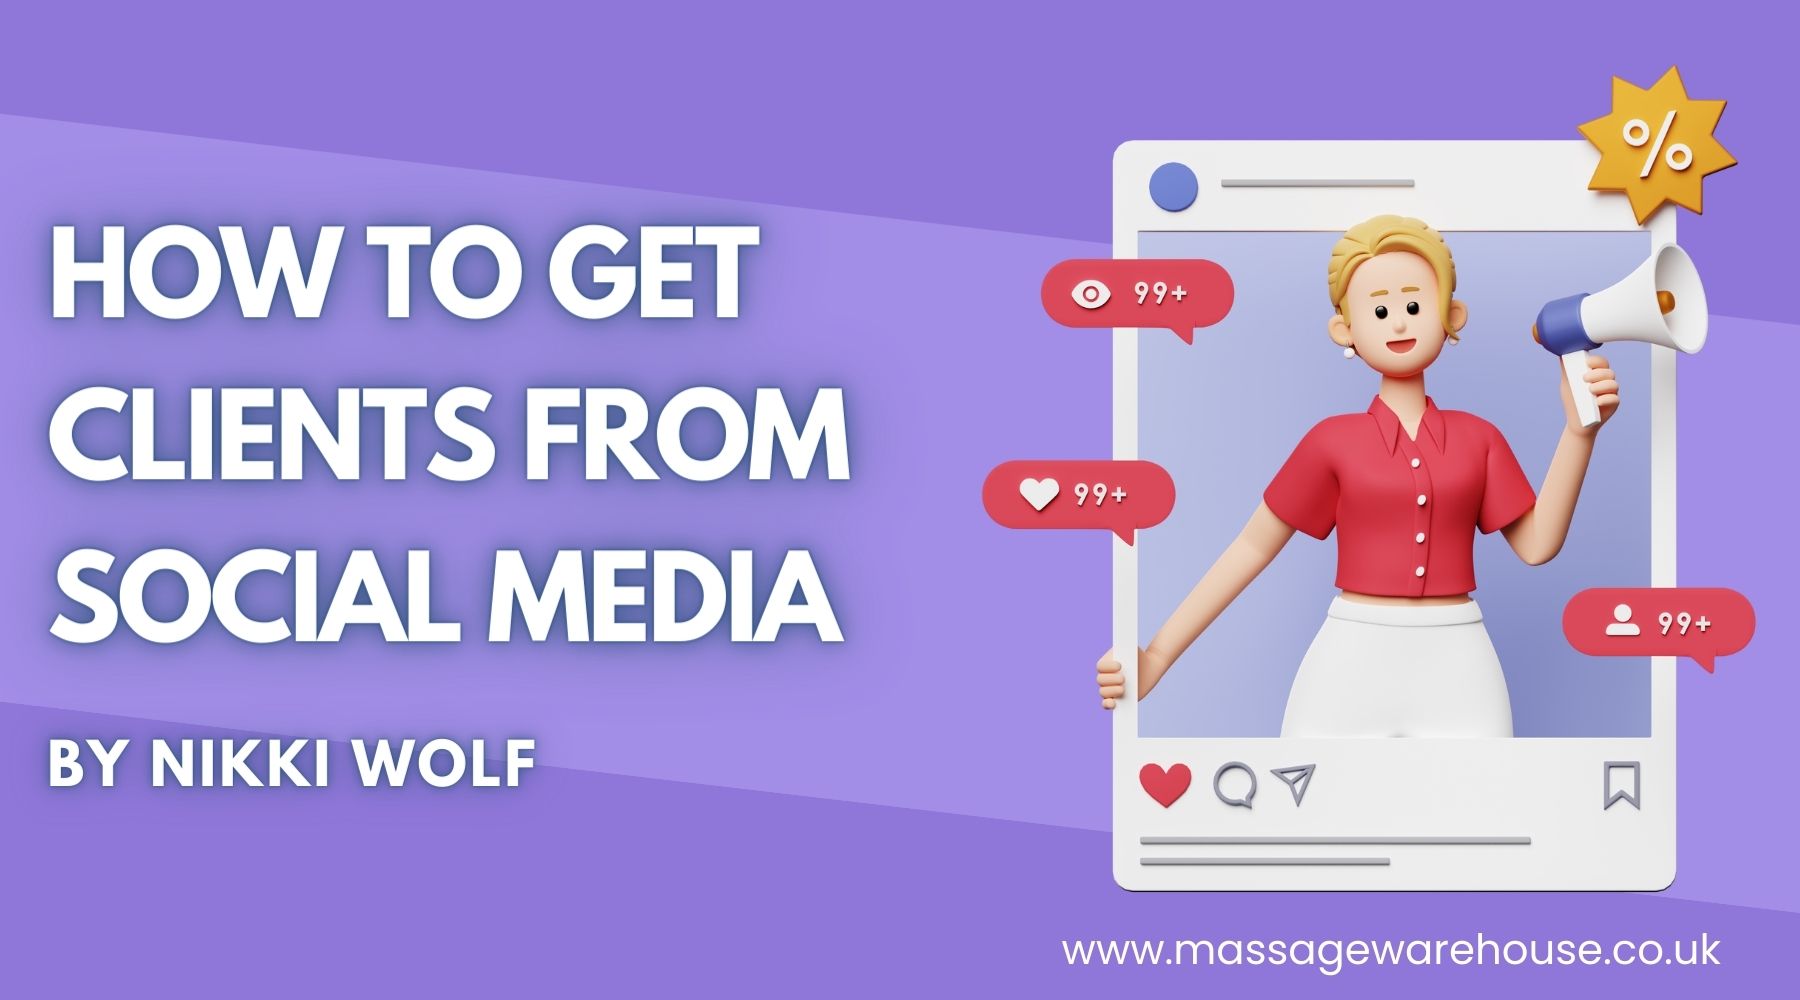 How to get Clients from Social Media